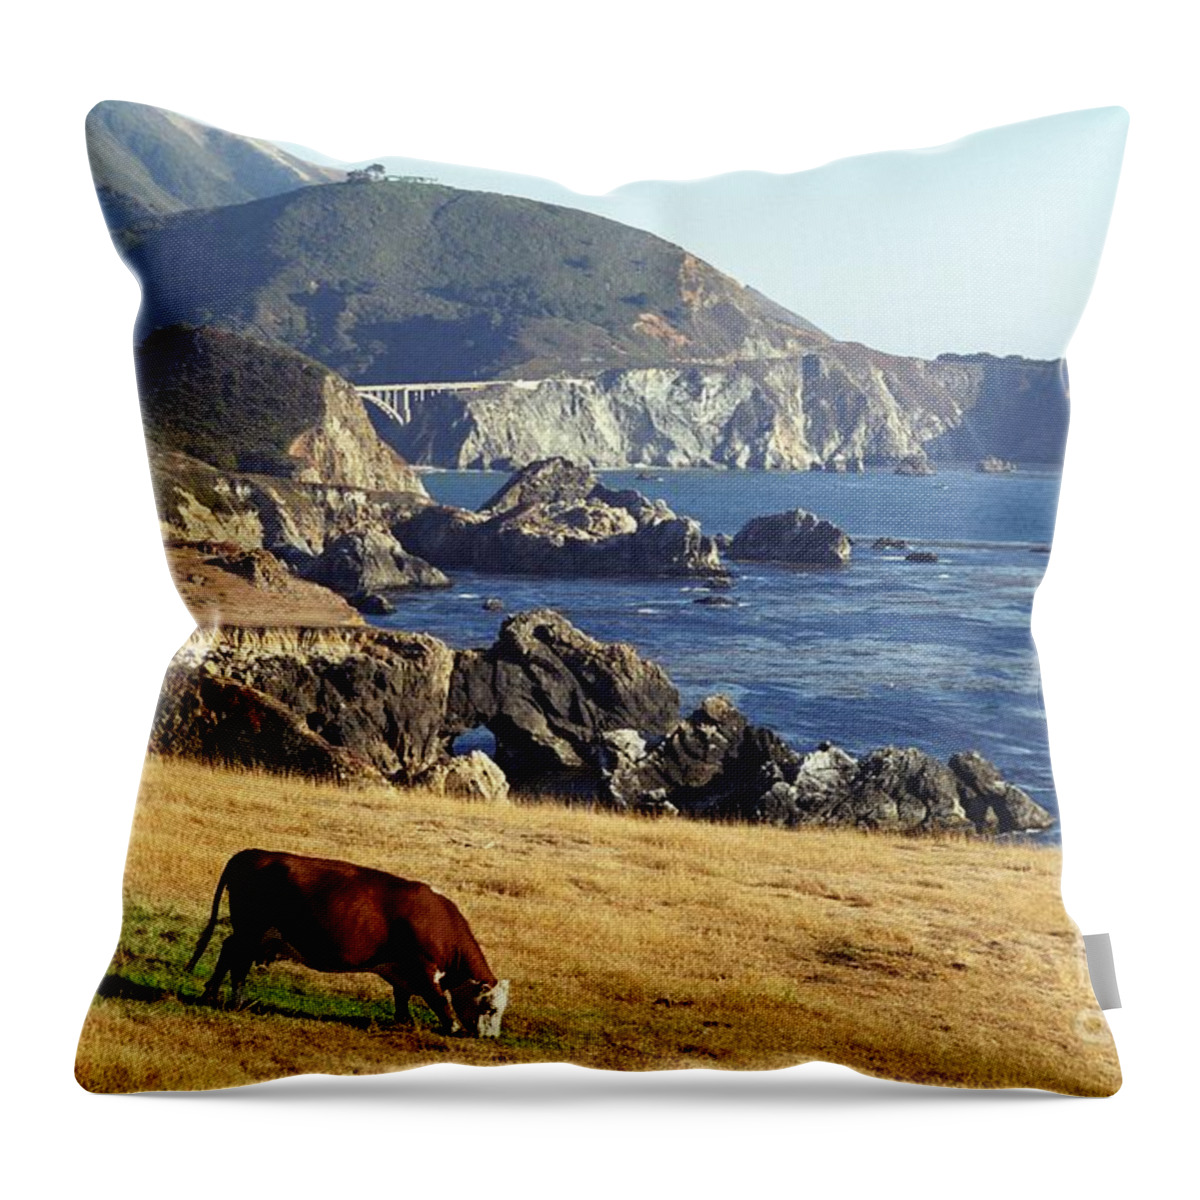 Cow Throw Pillow featuring the photograph Big Sur Cow by James B Toy